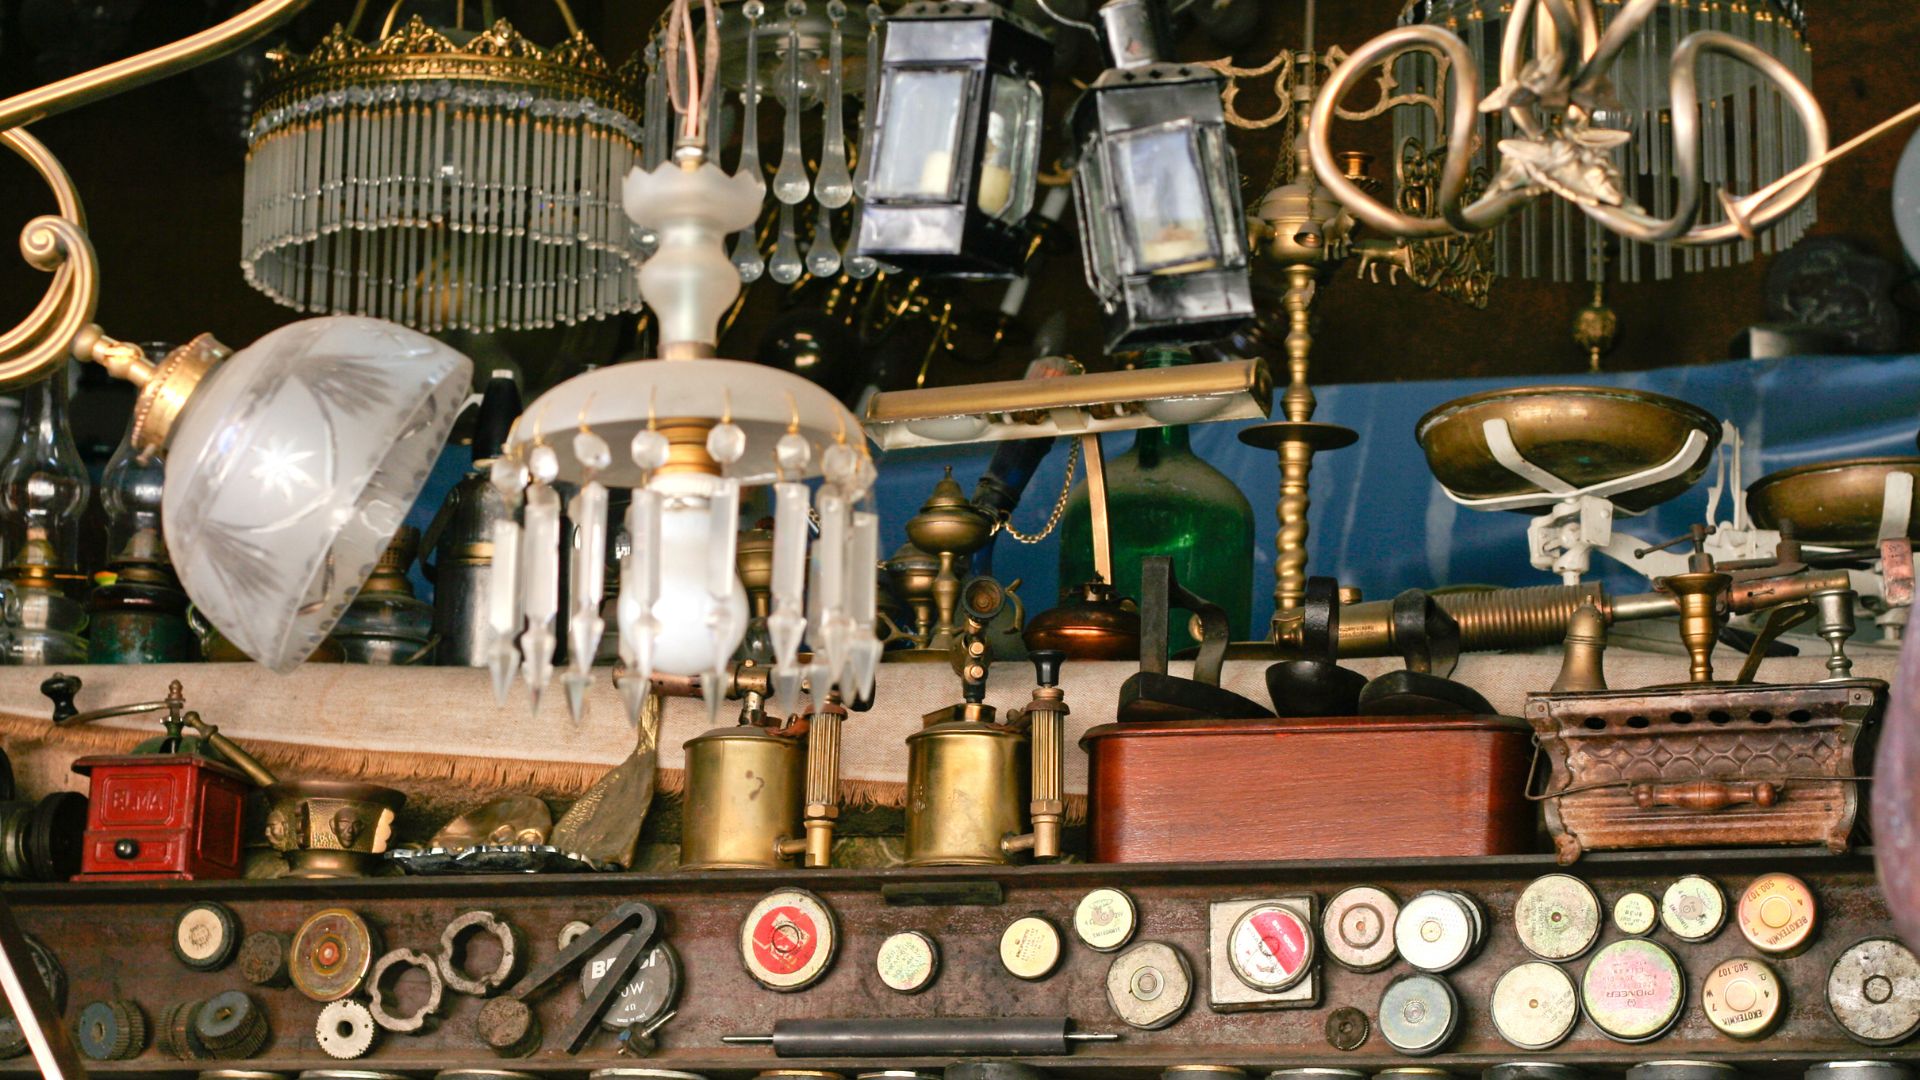  Items at an antique booth, including multiple chandeliers, a coffee grinder, an oil can, a scale, and buttons. 